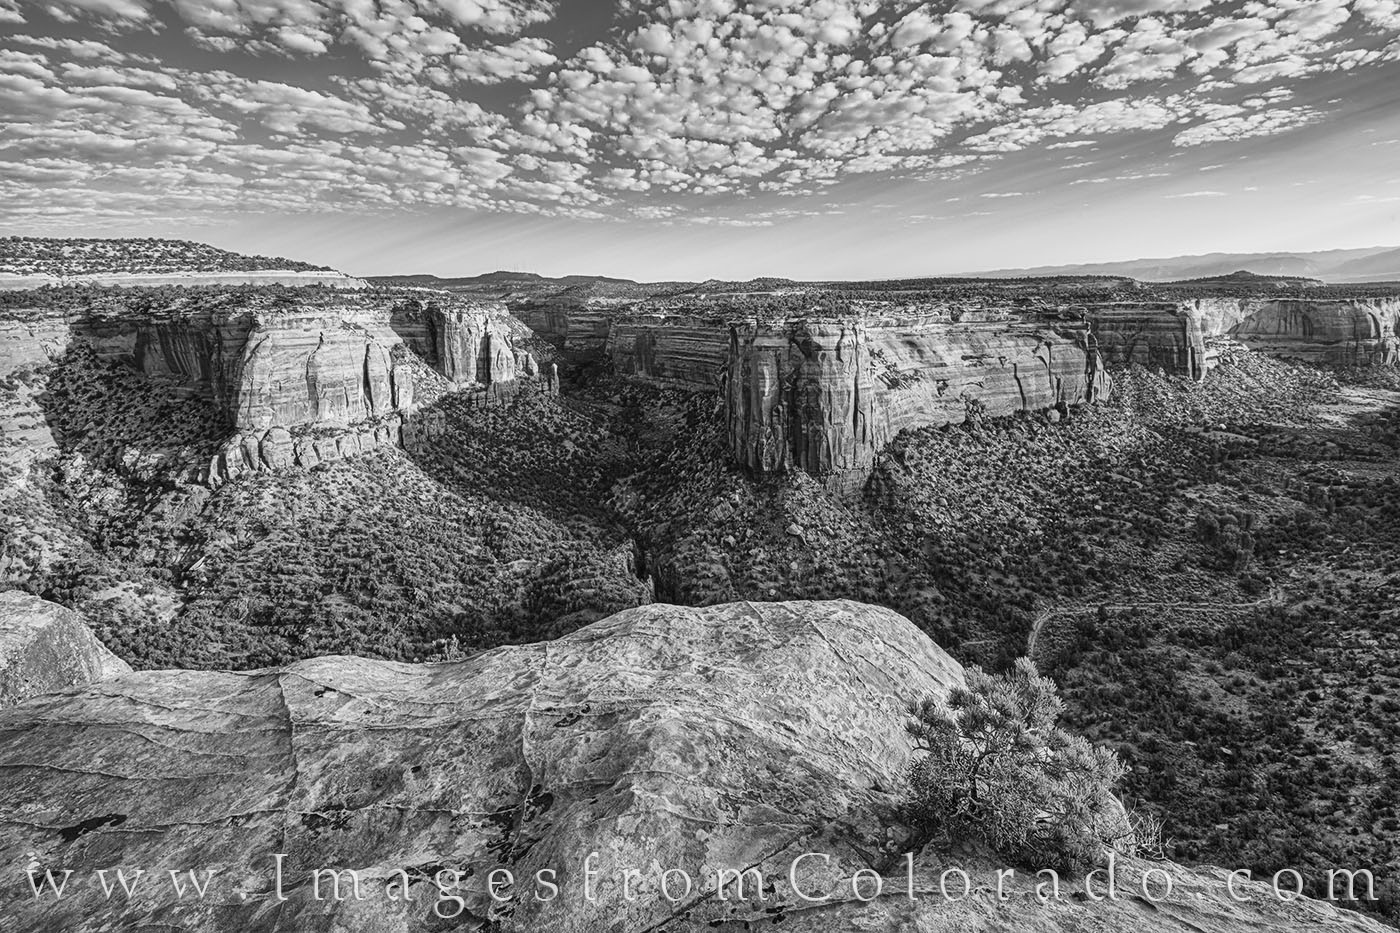 This black and white image comes from a small rock overlooking Ute Canyon in Colorado National Monument, a vastly underrated...